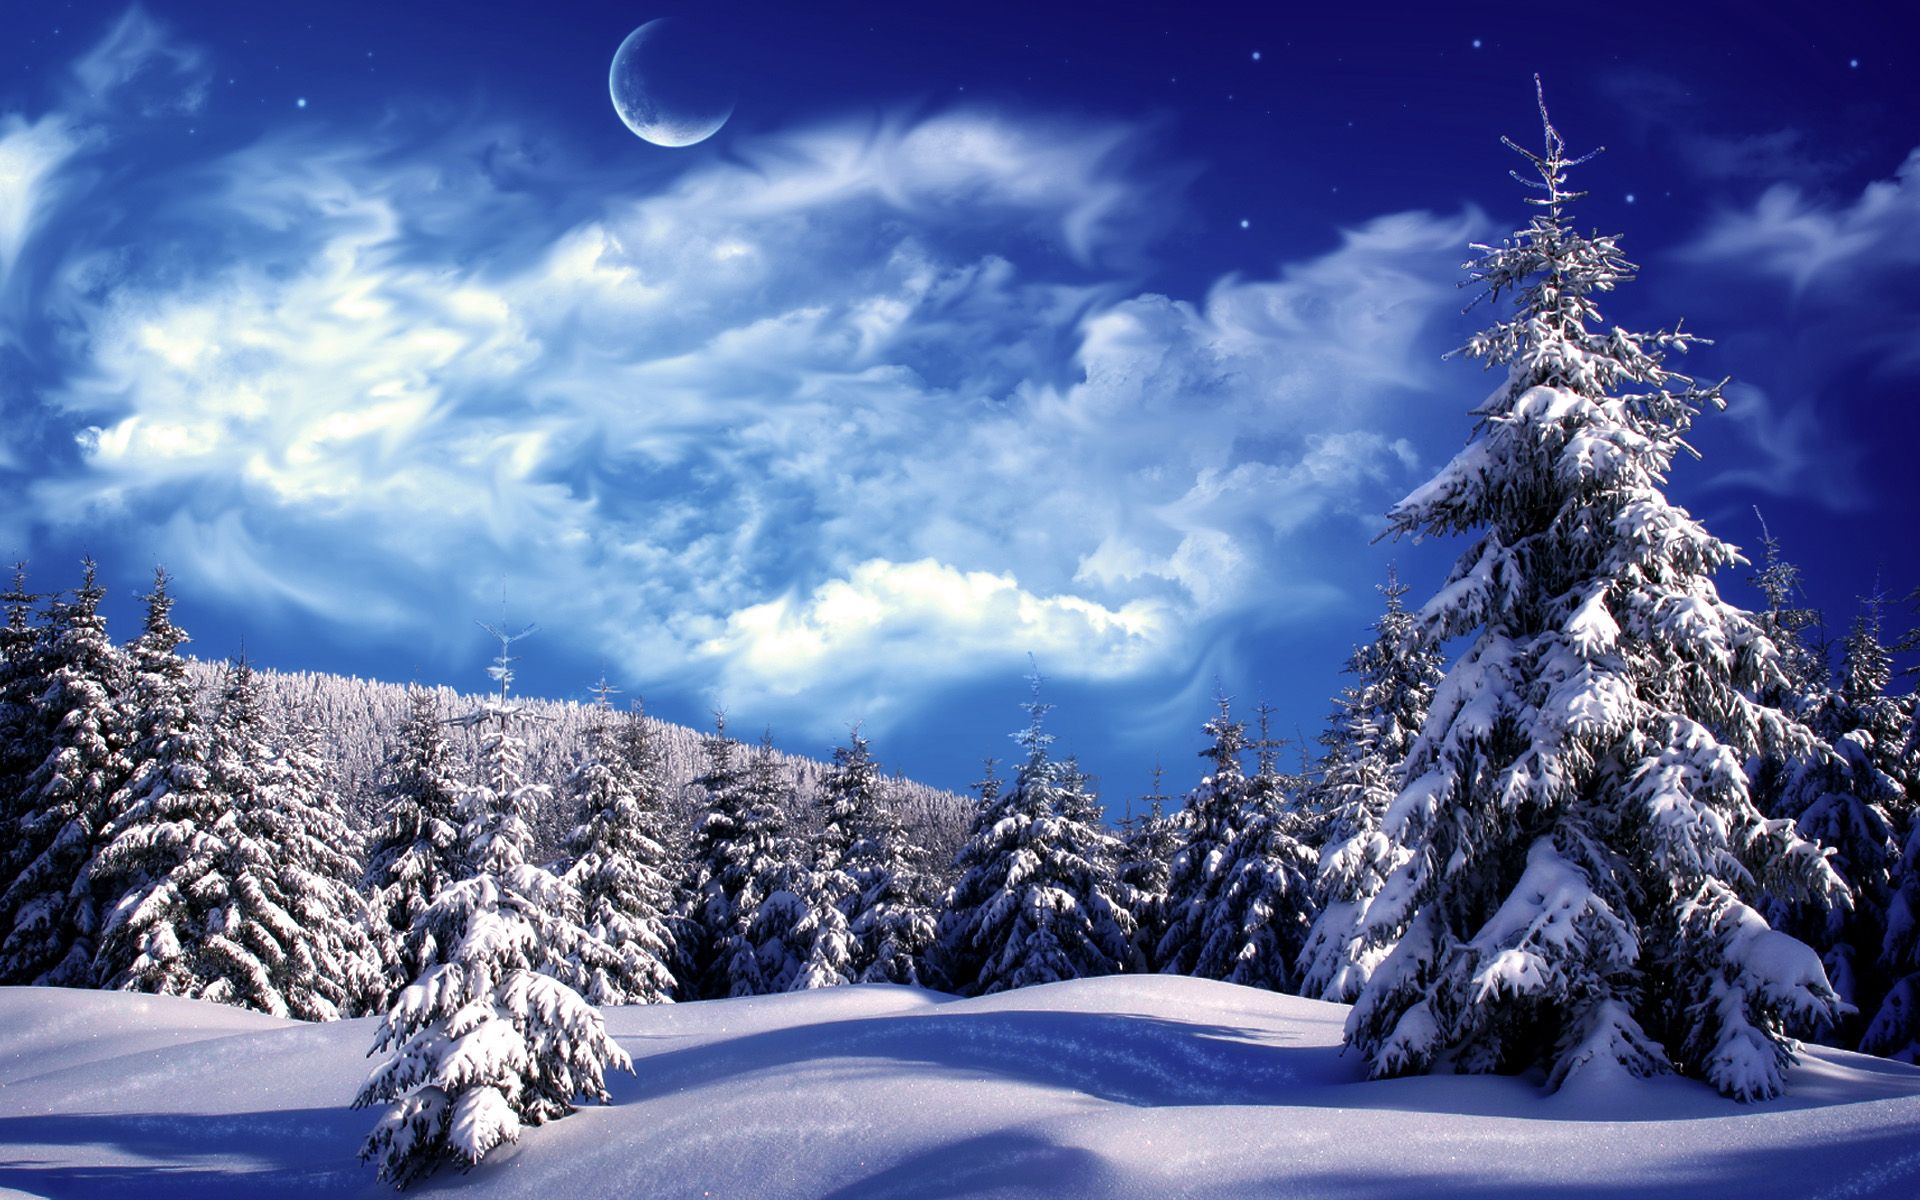 Blue magic winter night moon over the forest